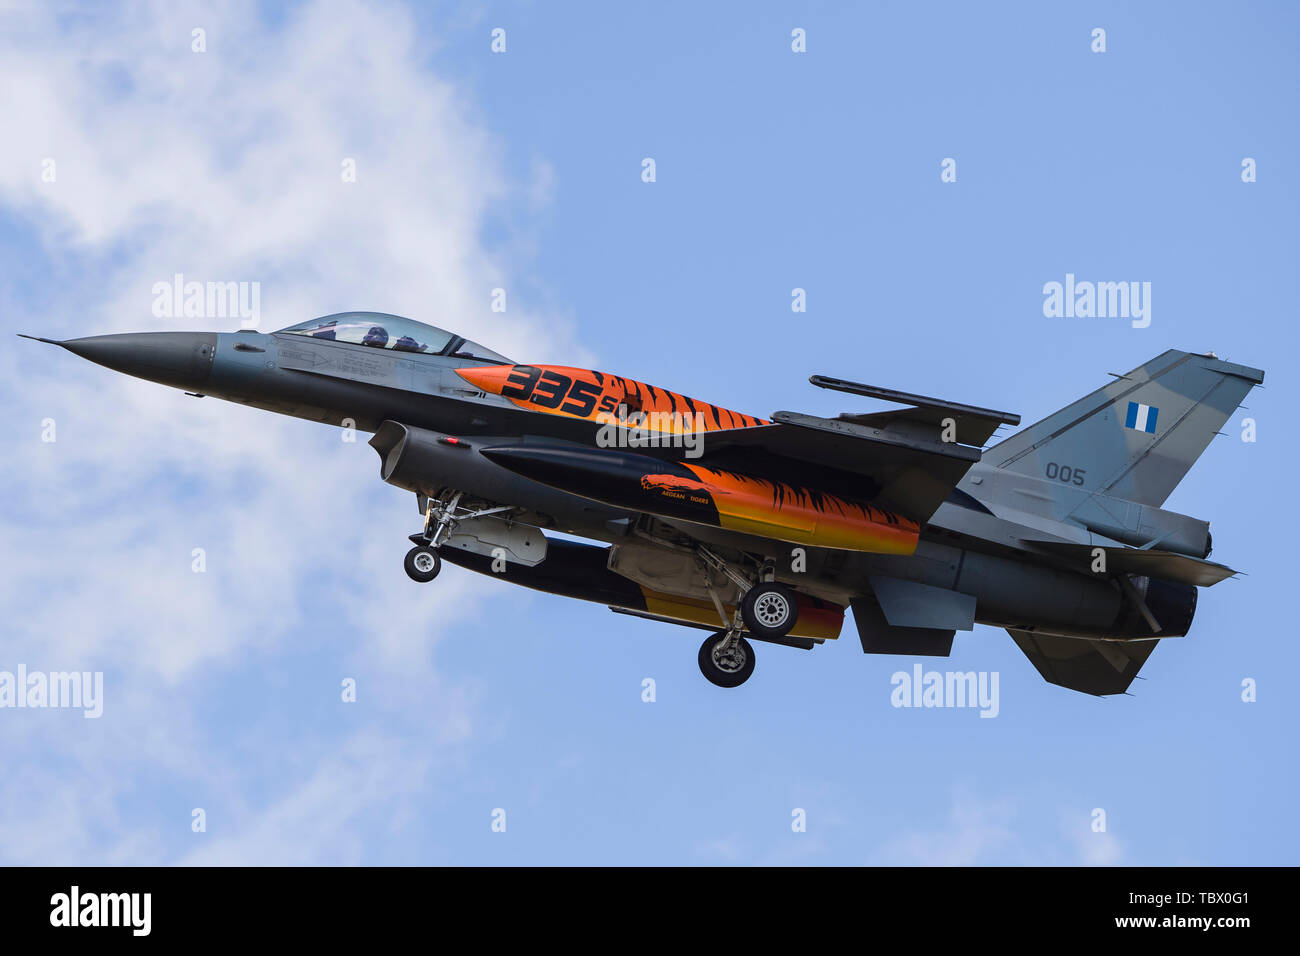 The F-16 fighter at the 2016 NATO Tiger Air Show belongs to the Greek Air Force and model F-16C / D Block 52. It's a newer batch of F - 16 fighters. The fighter is a potential opponent with the F-16C / D Block 50 fighter jets of the neighbouring Turkish Air Force. Stock Photo